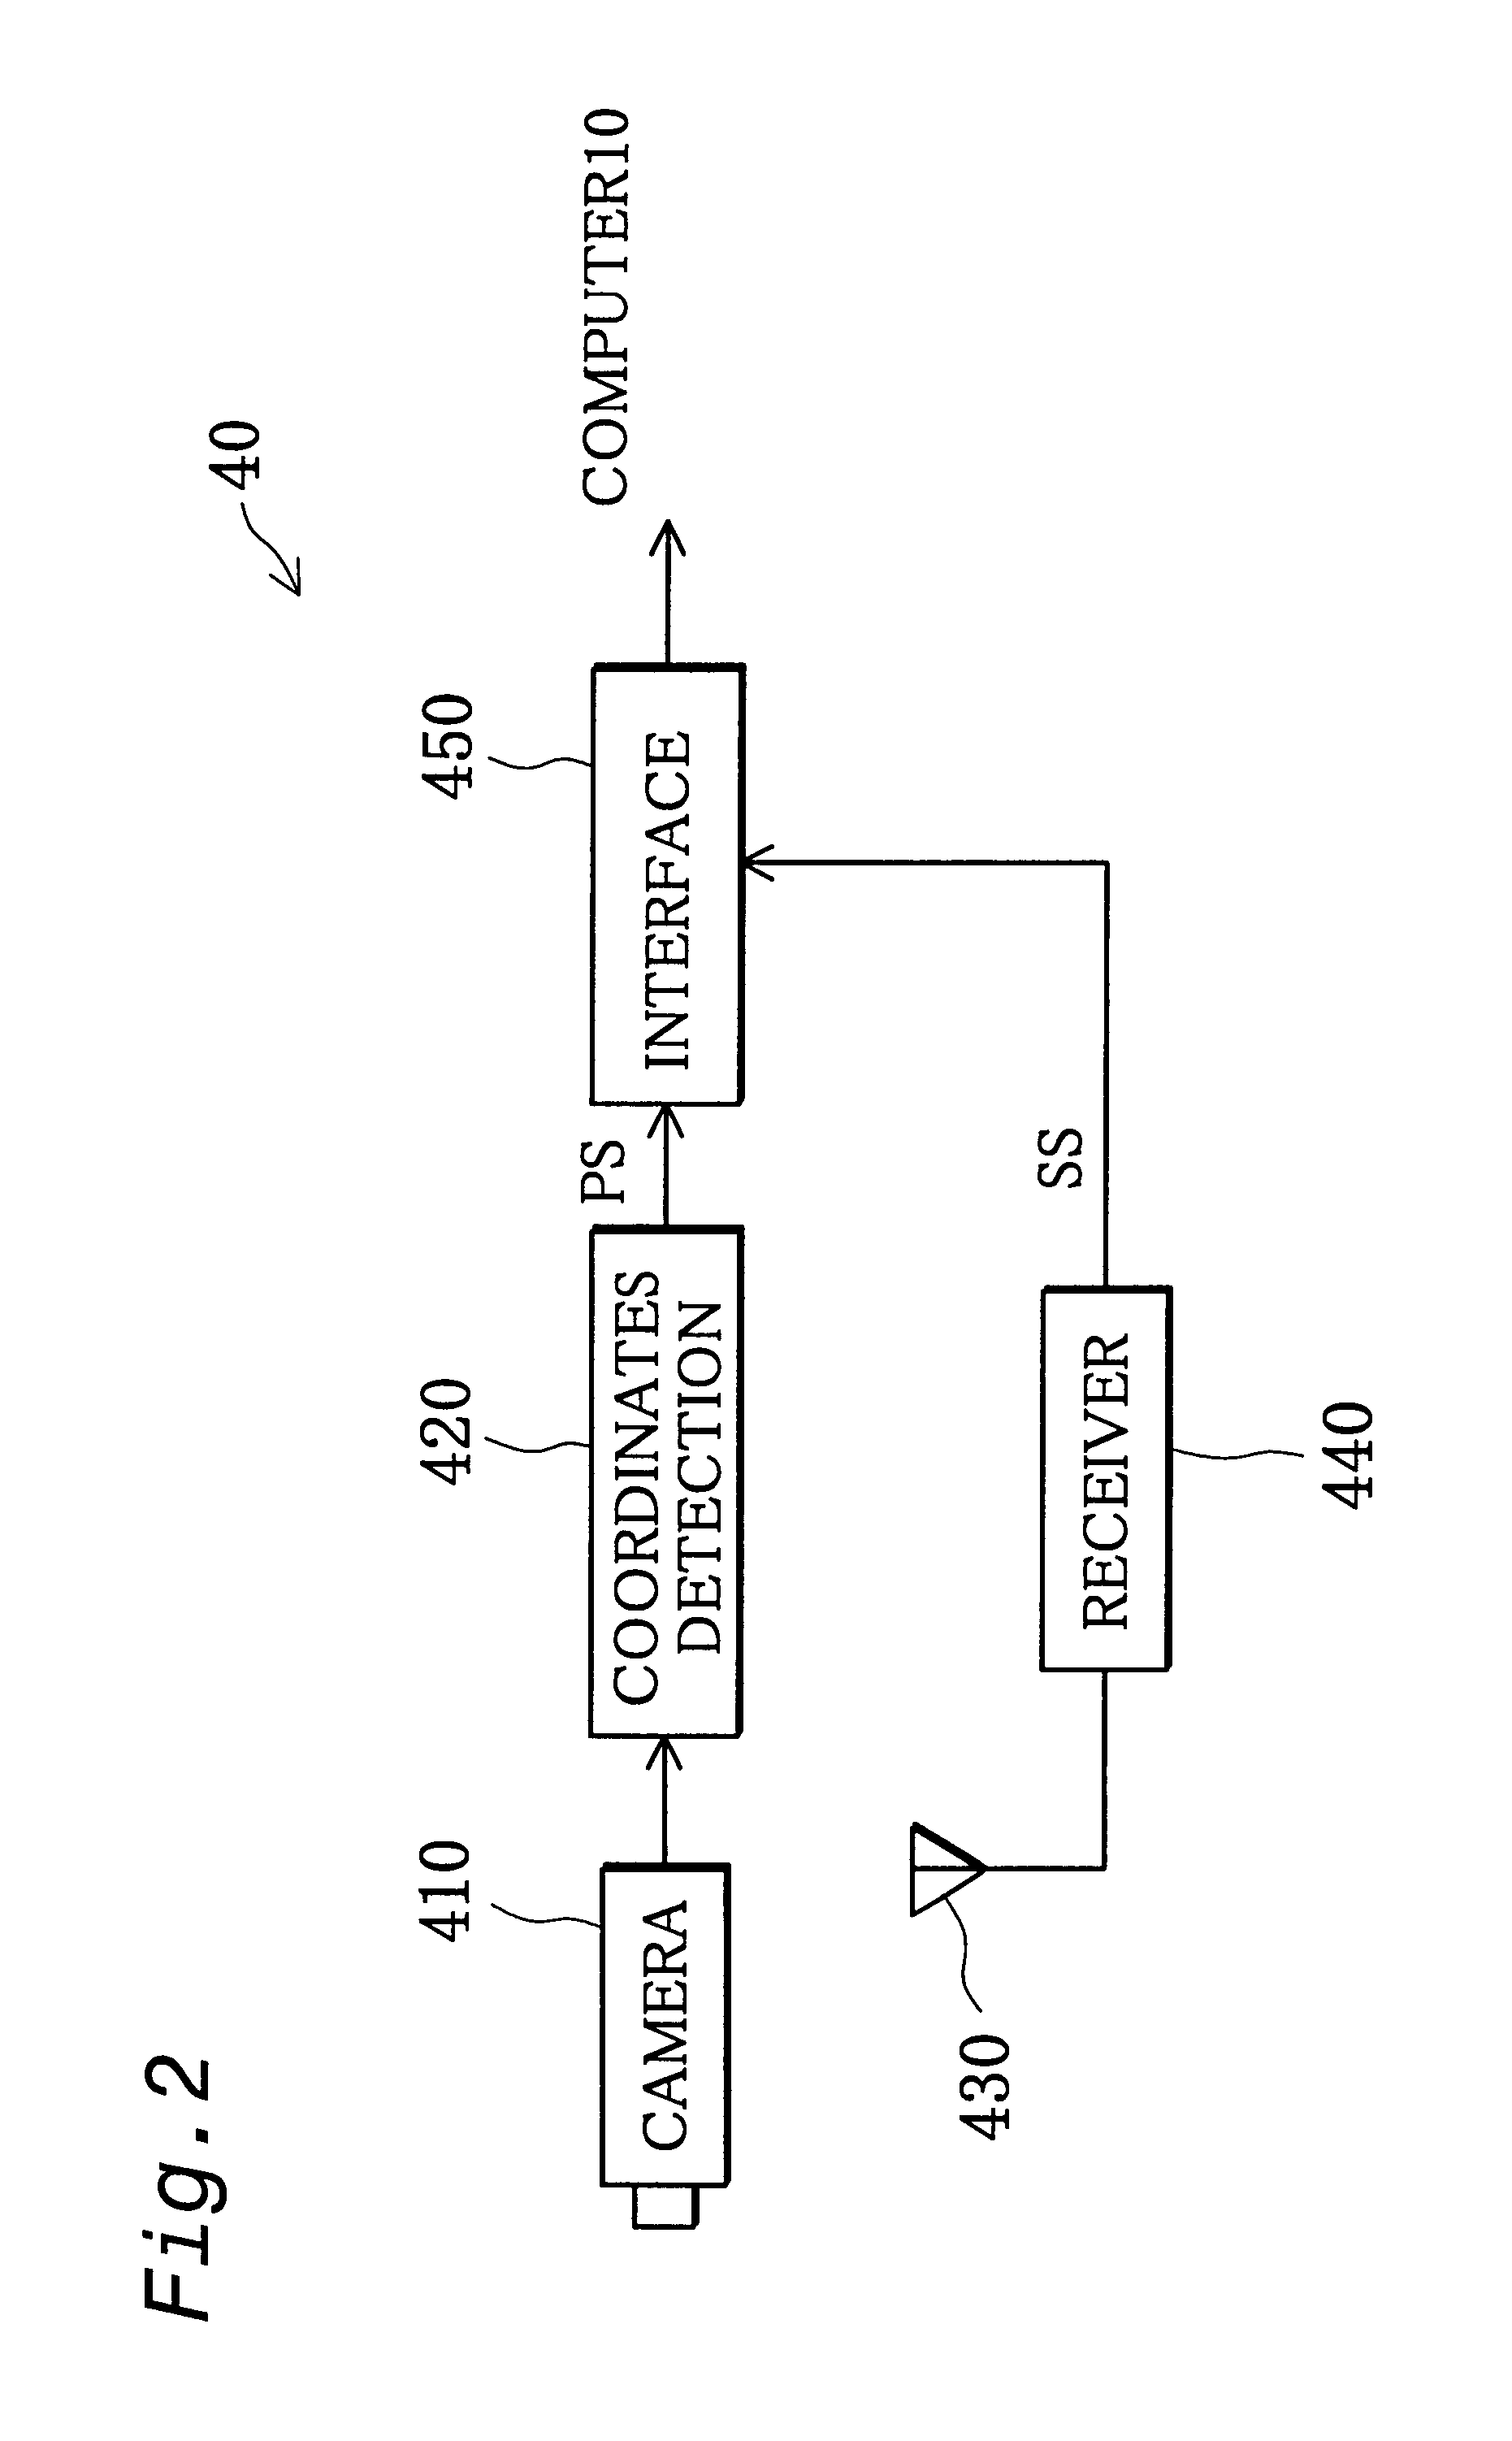 Input device using tapping sound detection